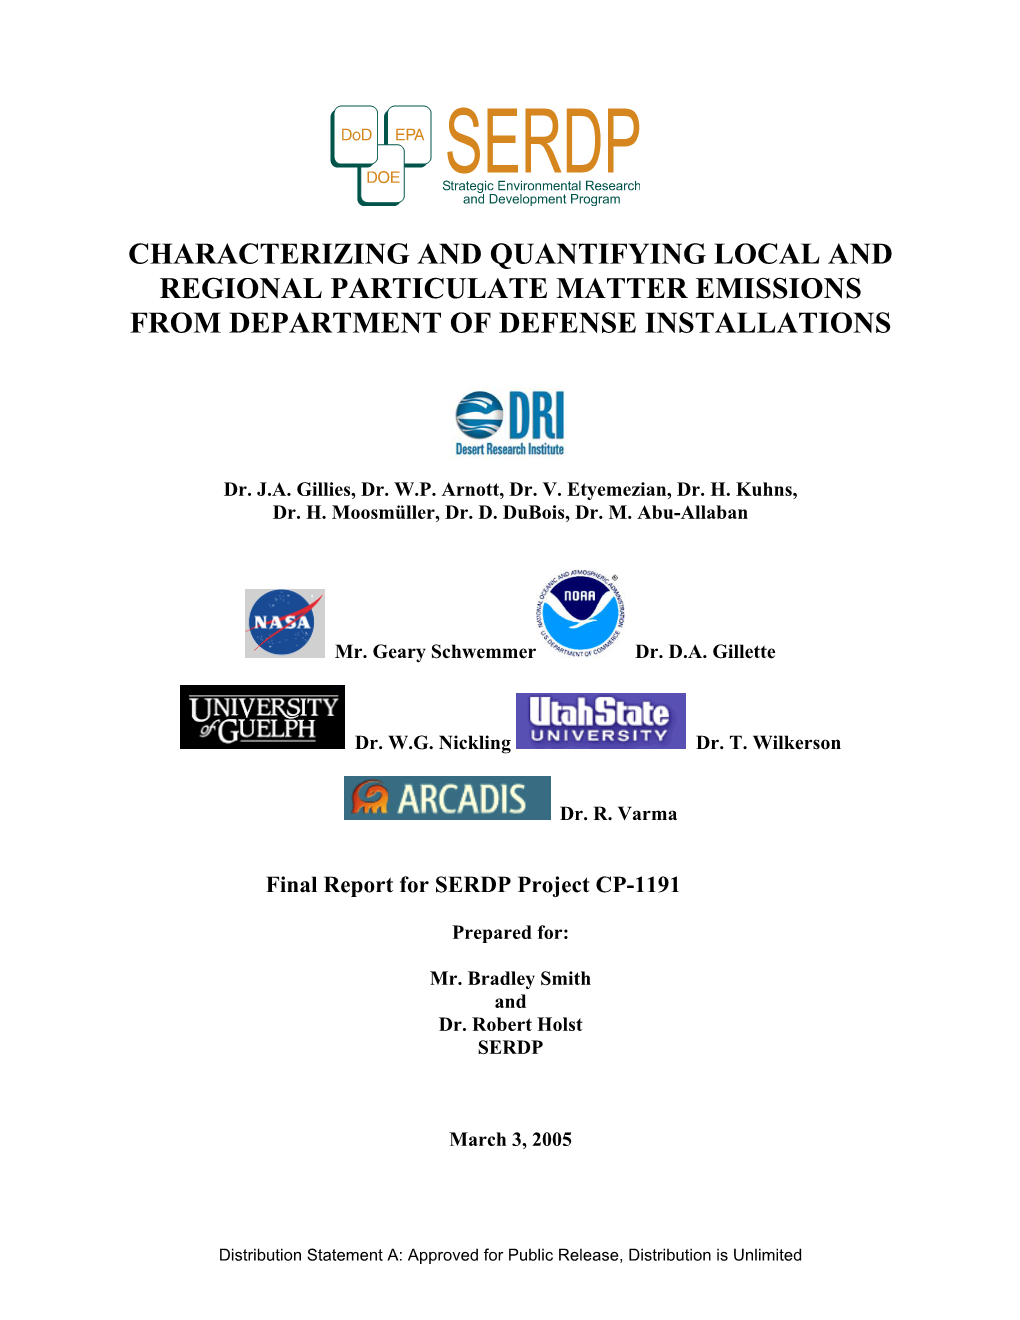 Characterizing and Quantifying Local and Regional Particulate Matter Emissions from Department of Defense Installations